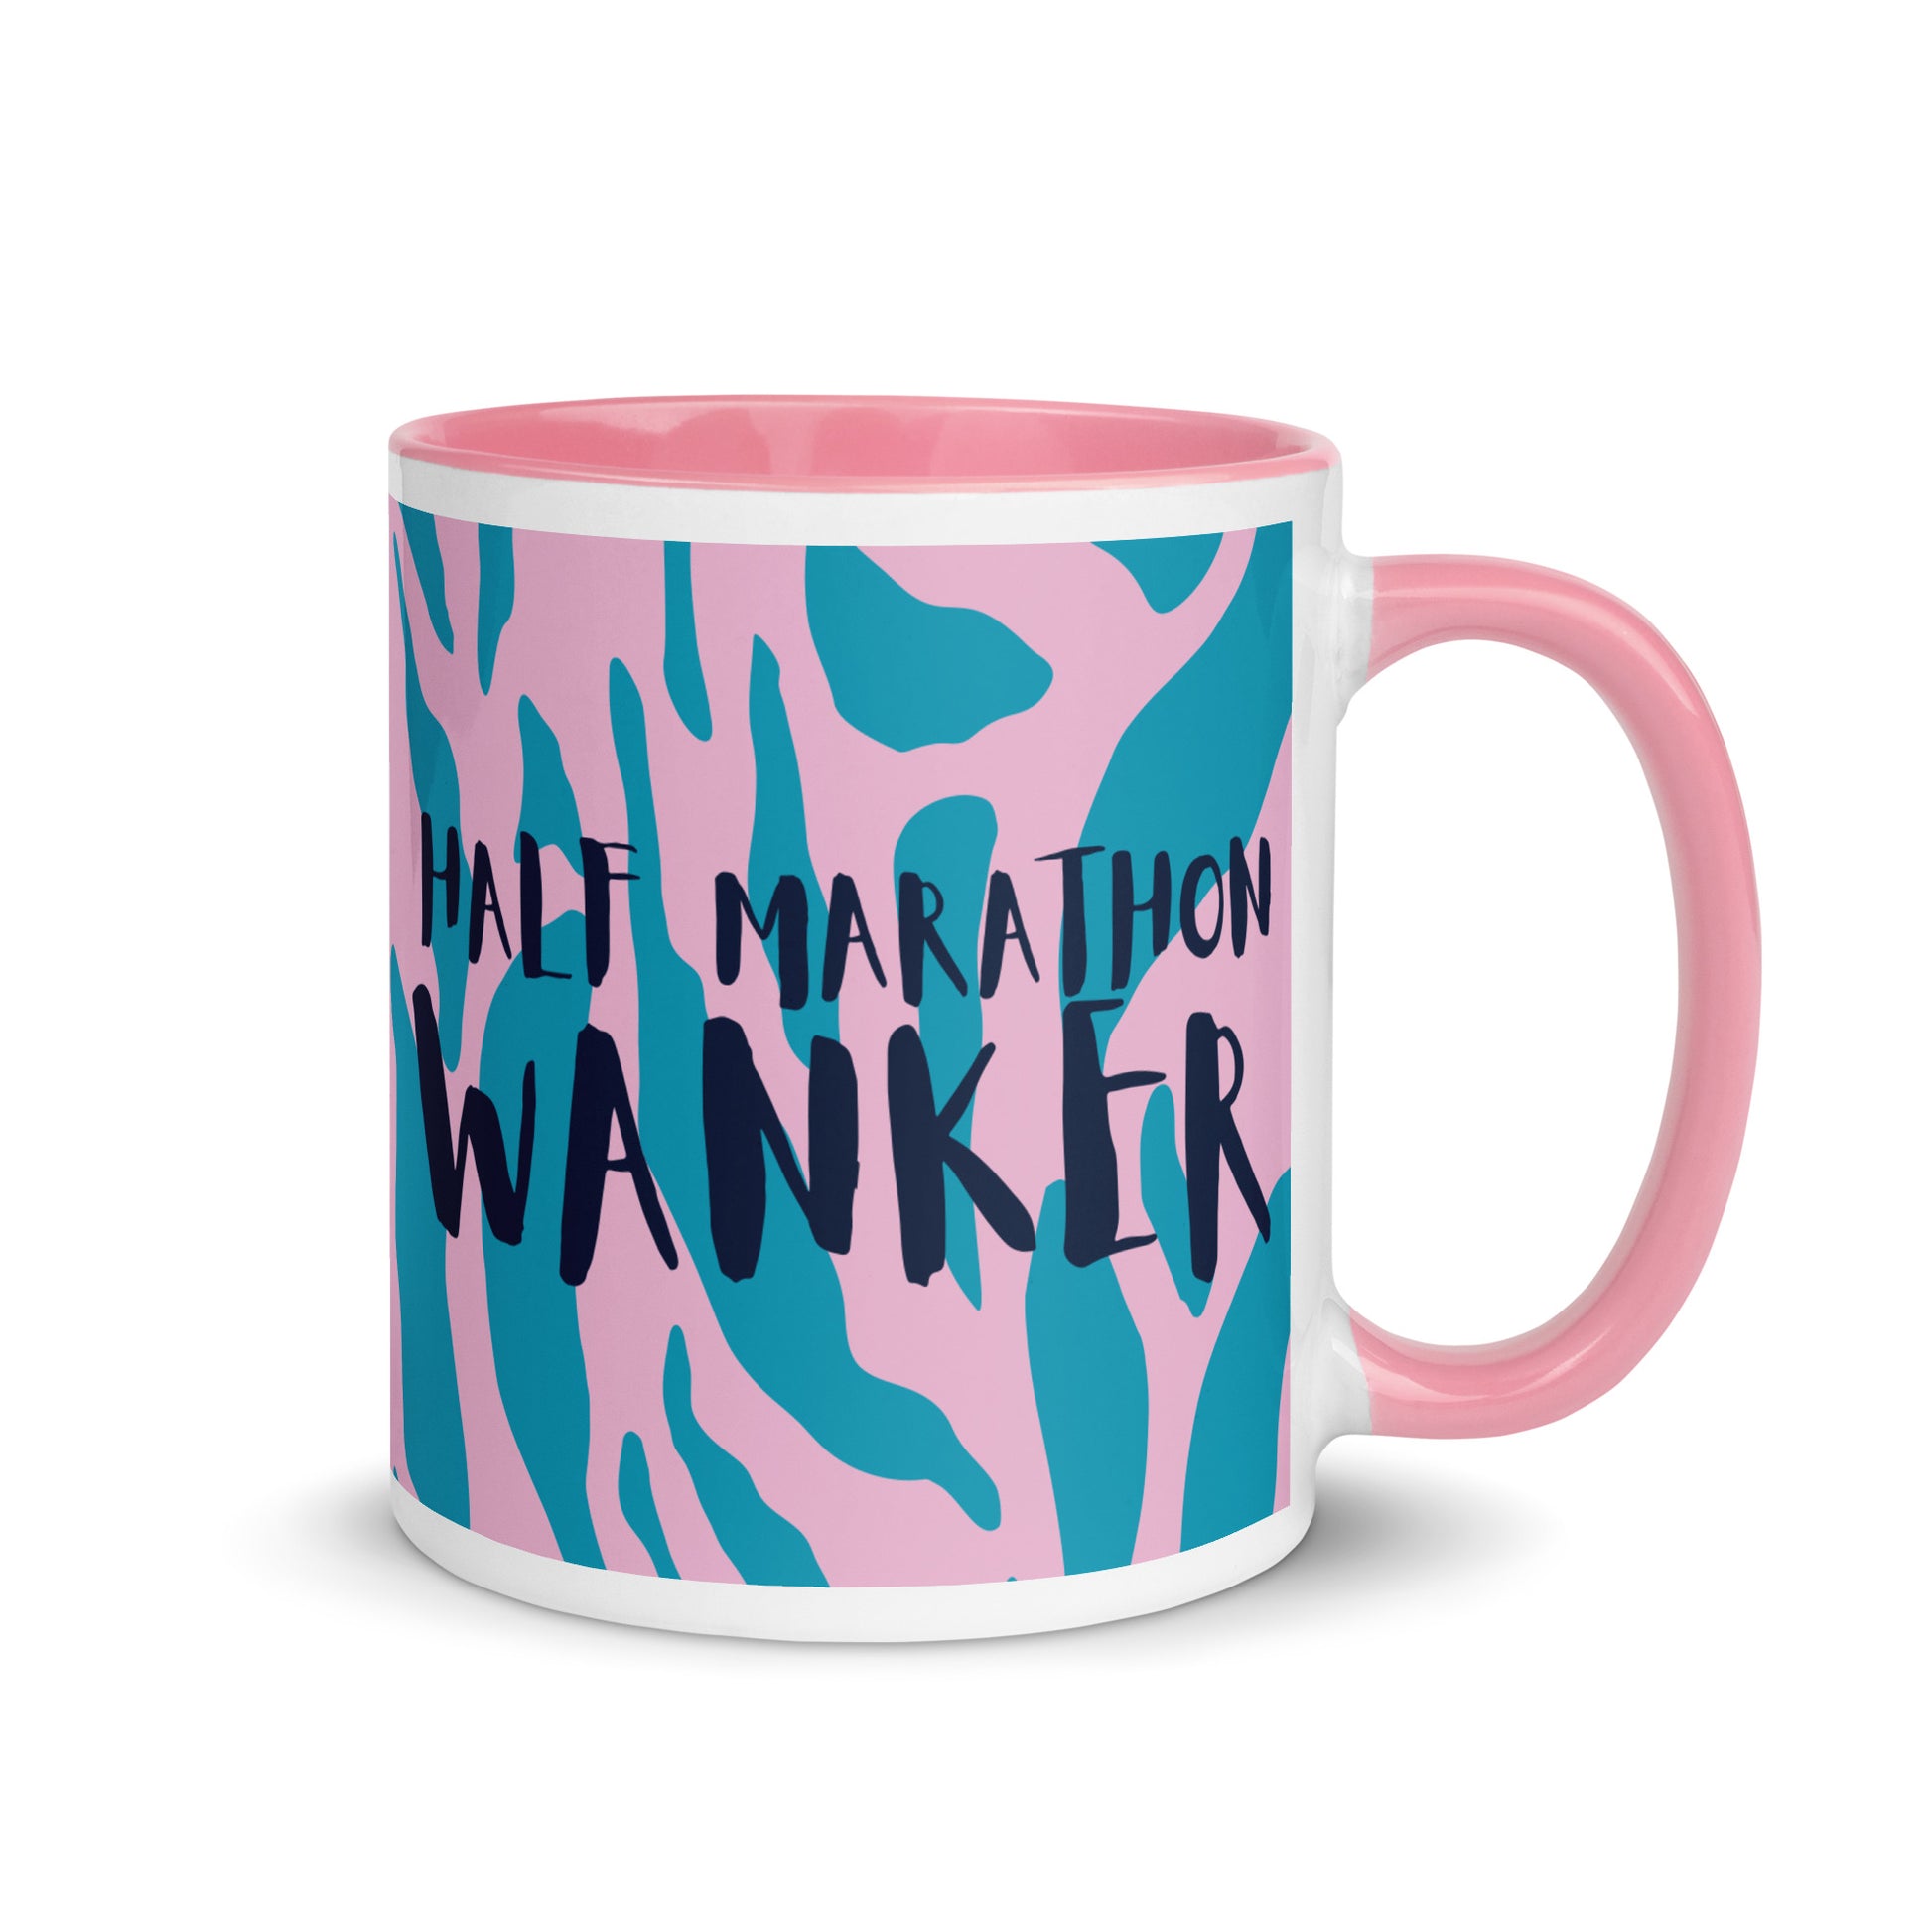 Pink and white mug with half marathon wanker written across the side, with a blue and pink animal print background